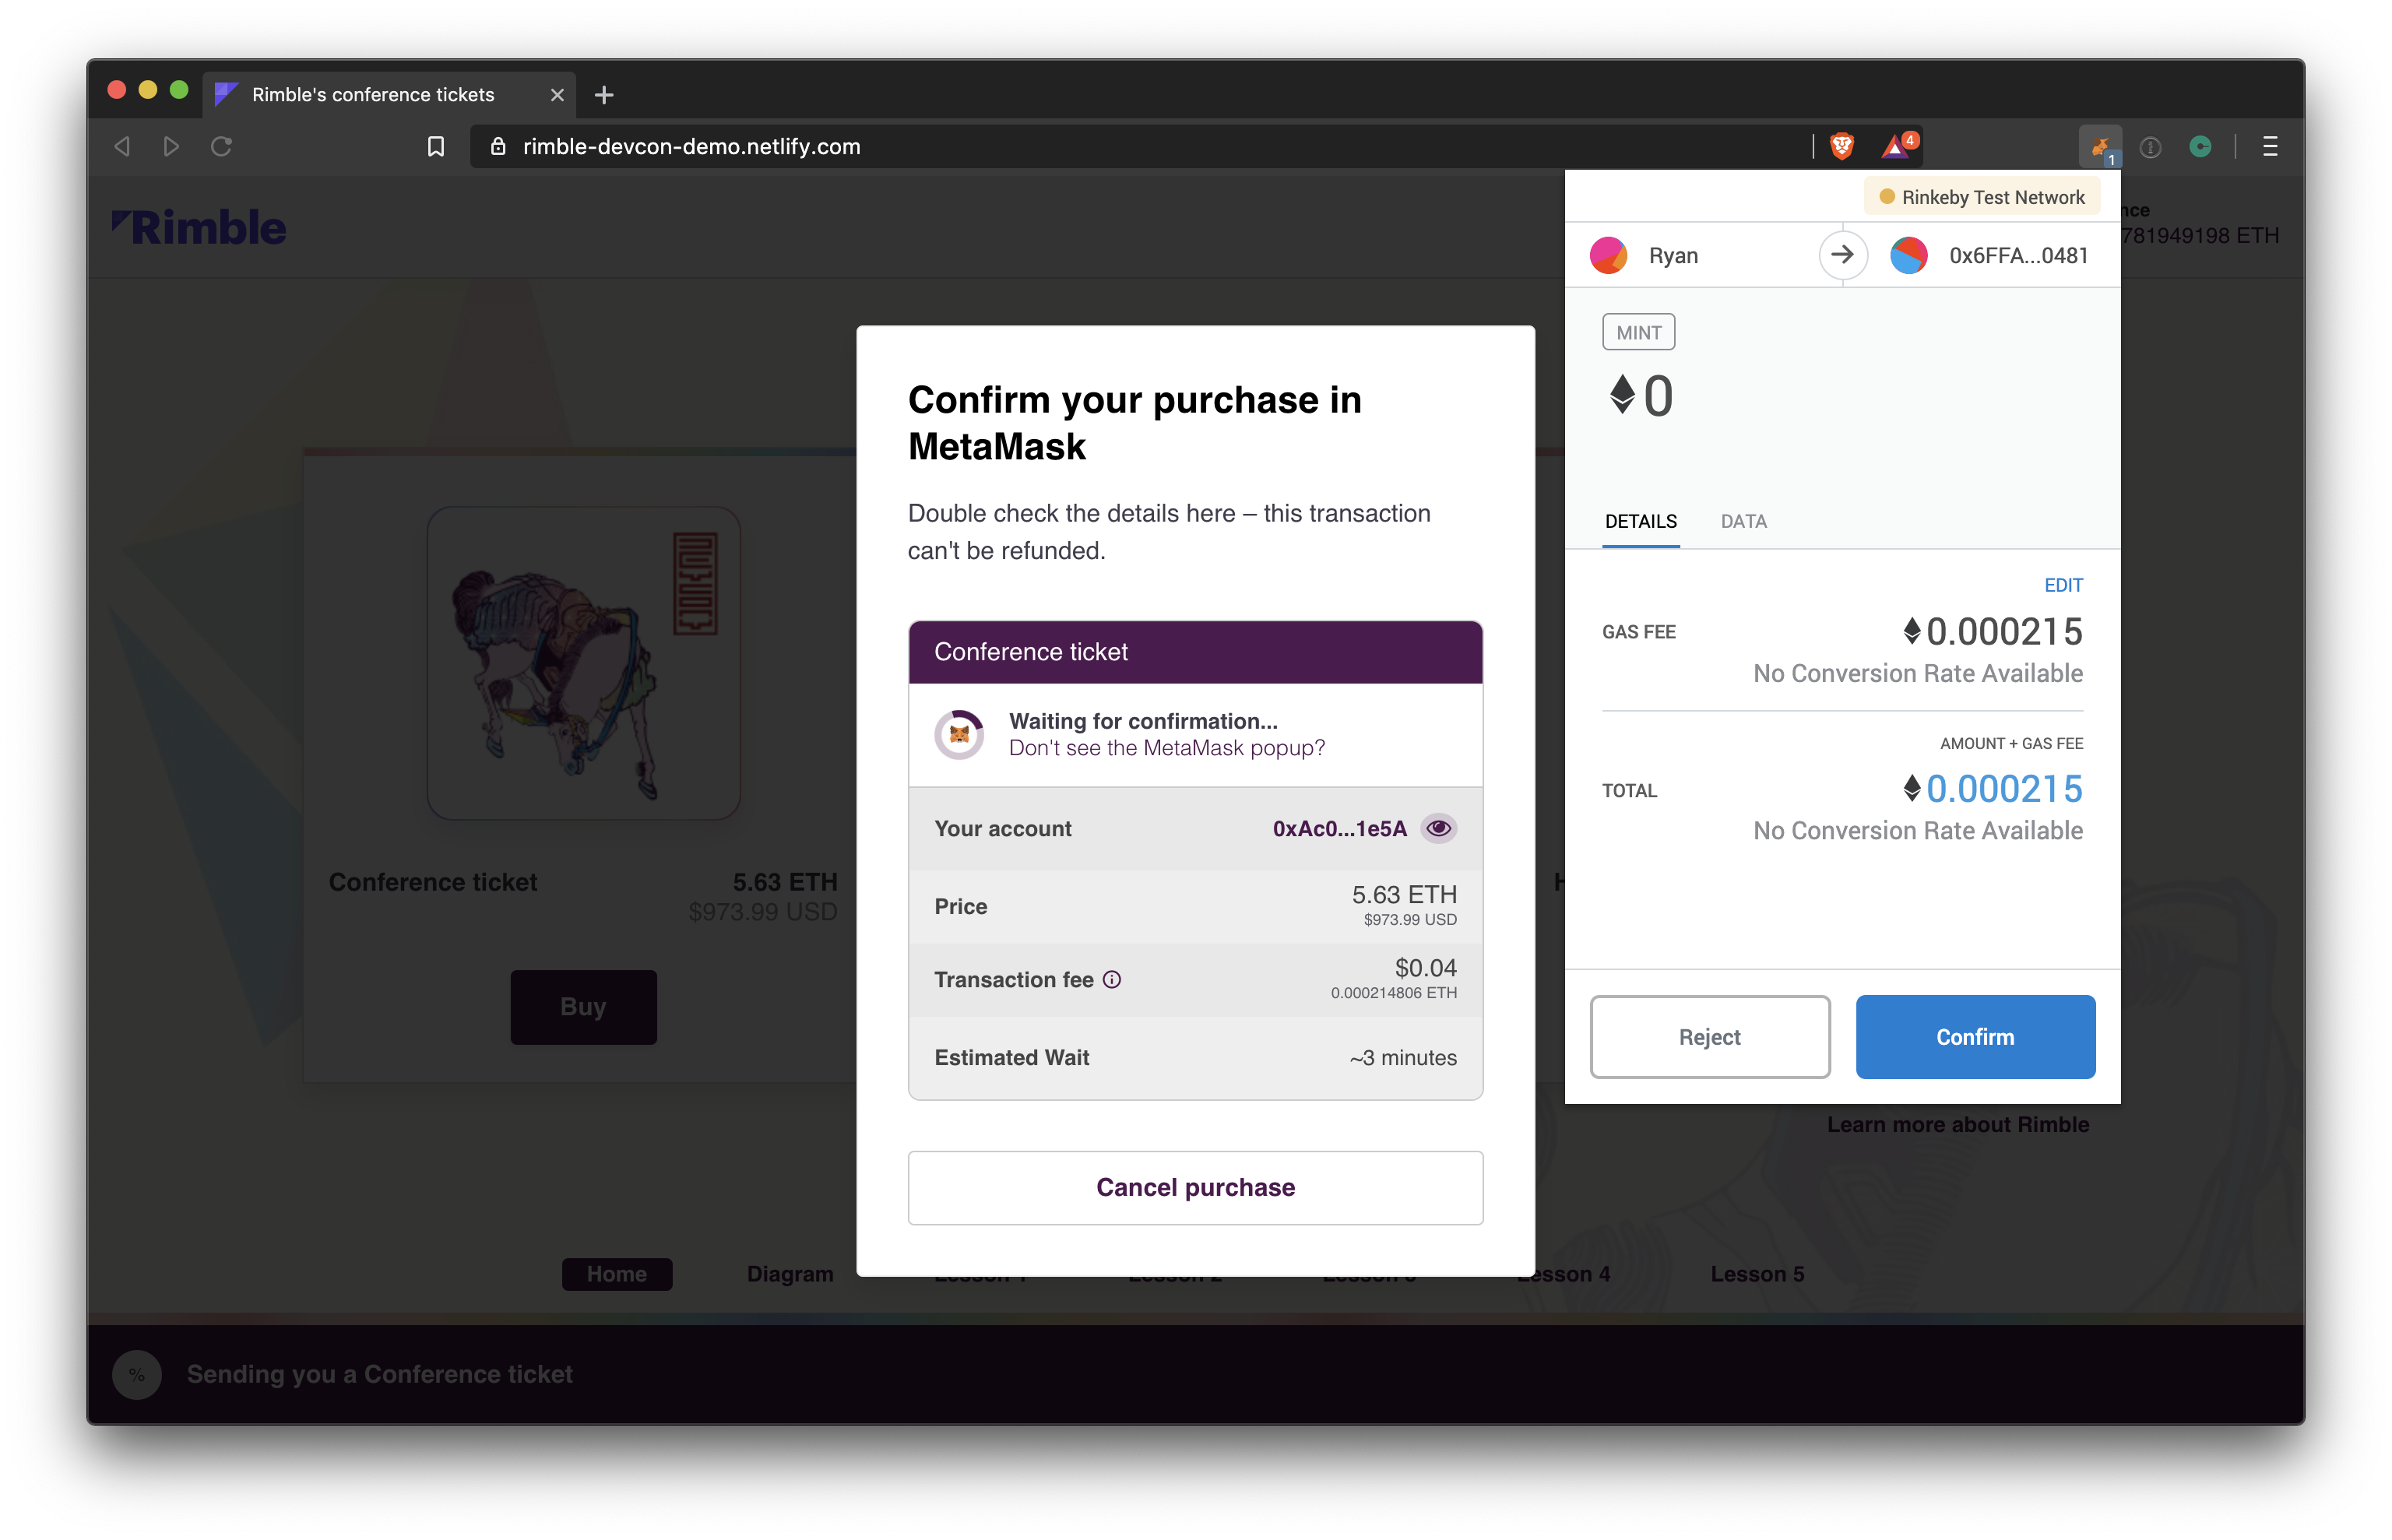 UI showing a connected Ethereum account and its balance